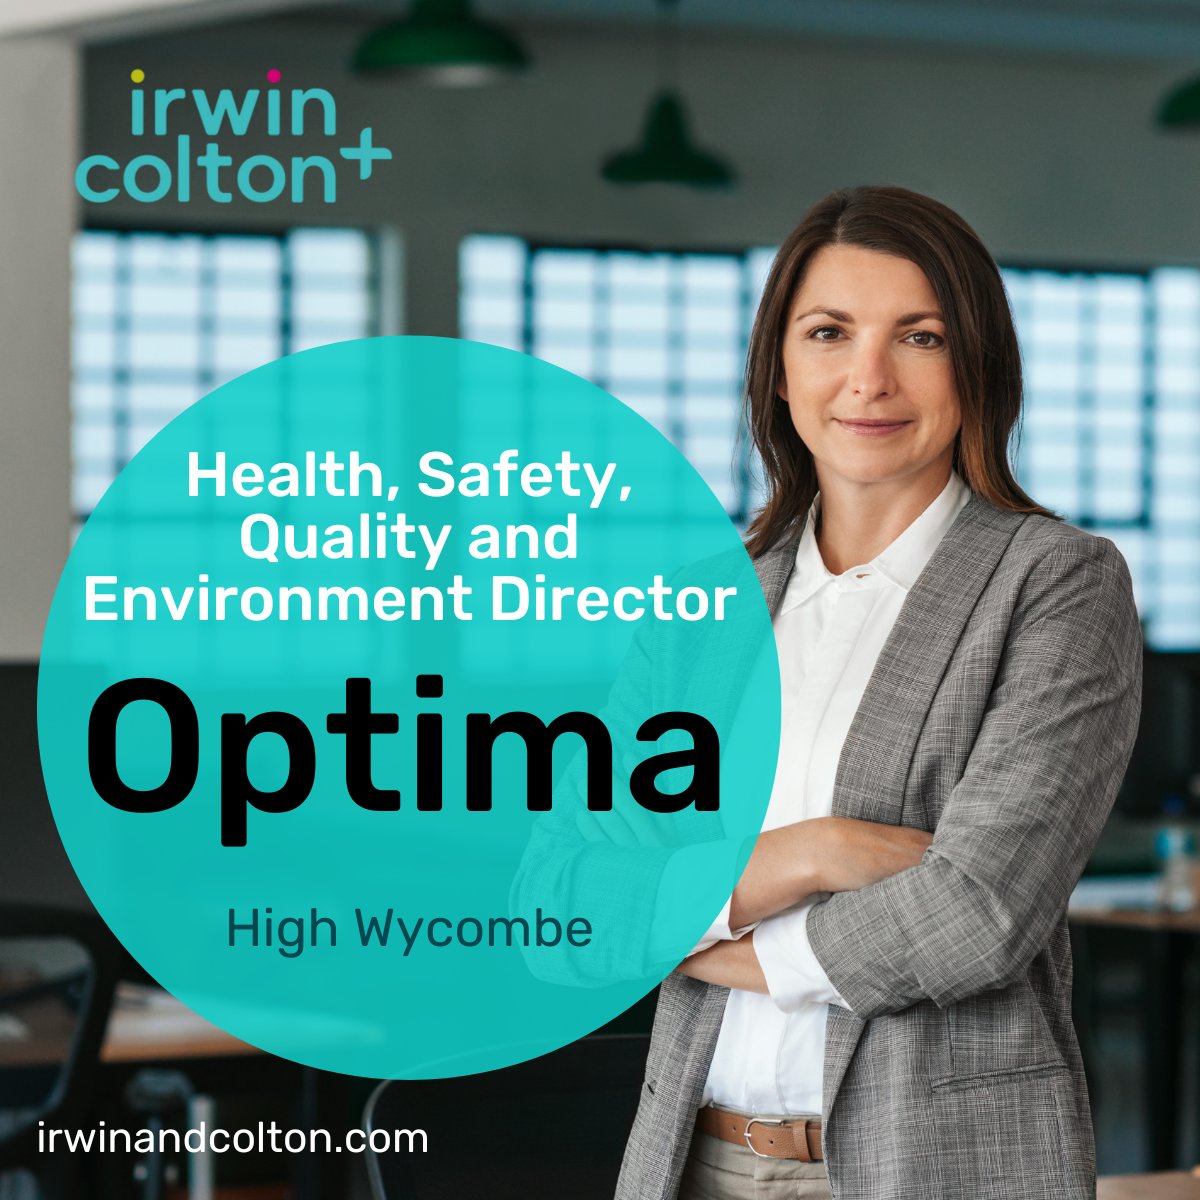 We have been engaged by Optima Systems, an international leader in glass partitioning systems and solutions to recruit a Health, Safety, Quality and Environment Director. To apply visit shorturl.at/agho8 #safetyjob #safetydirector